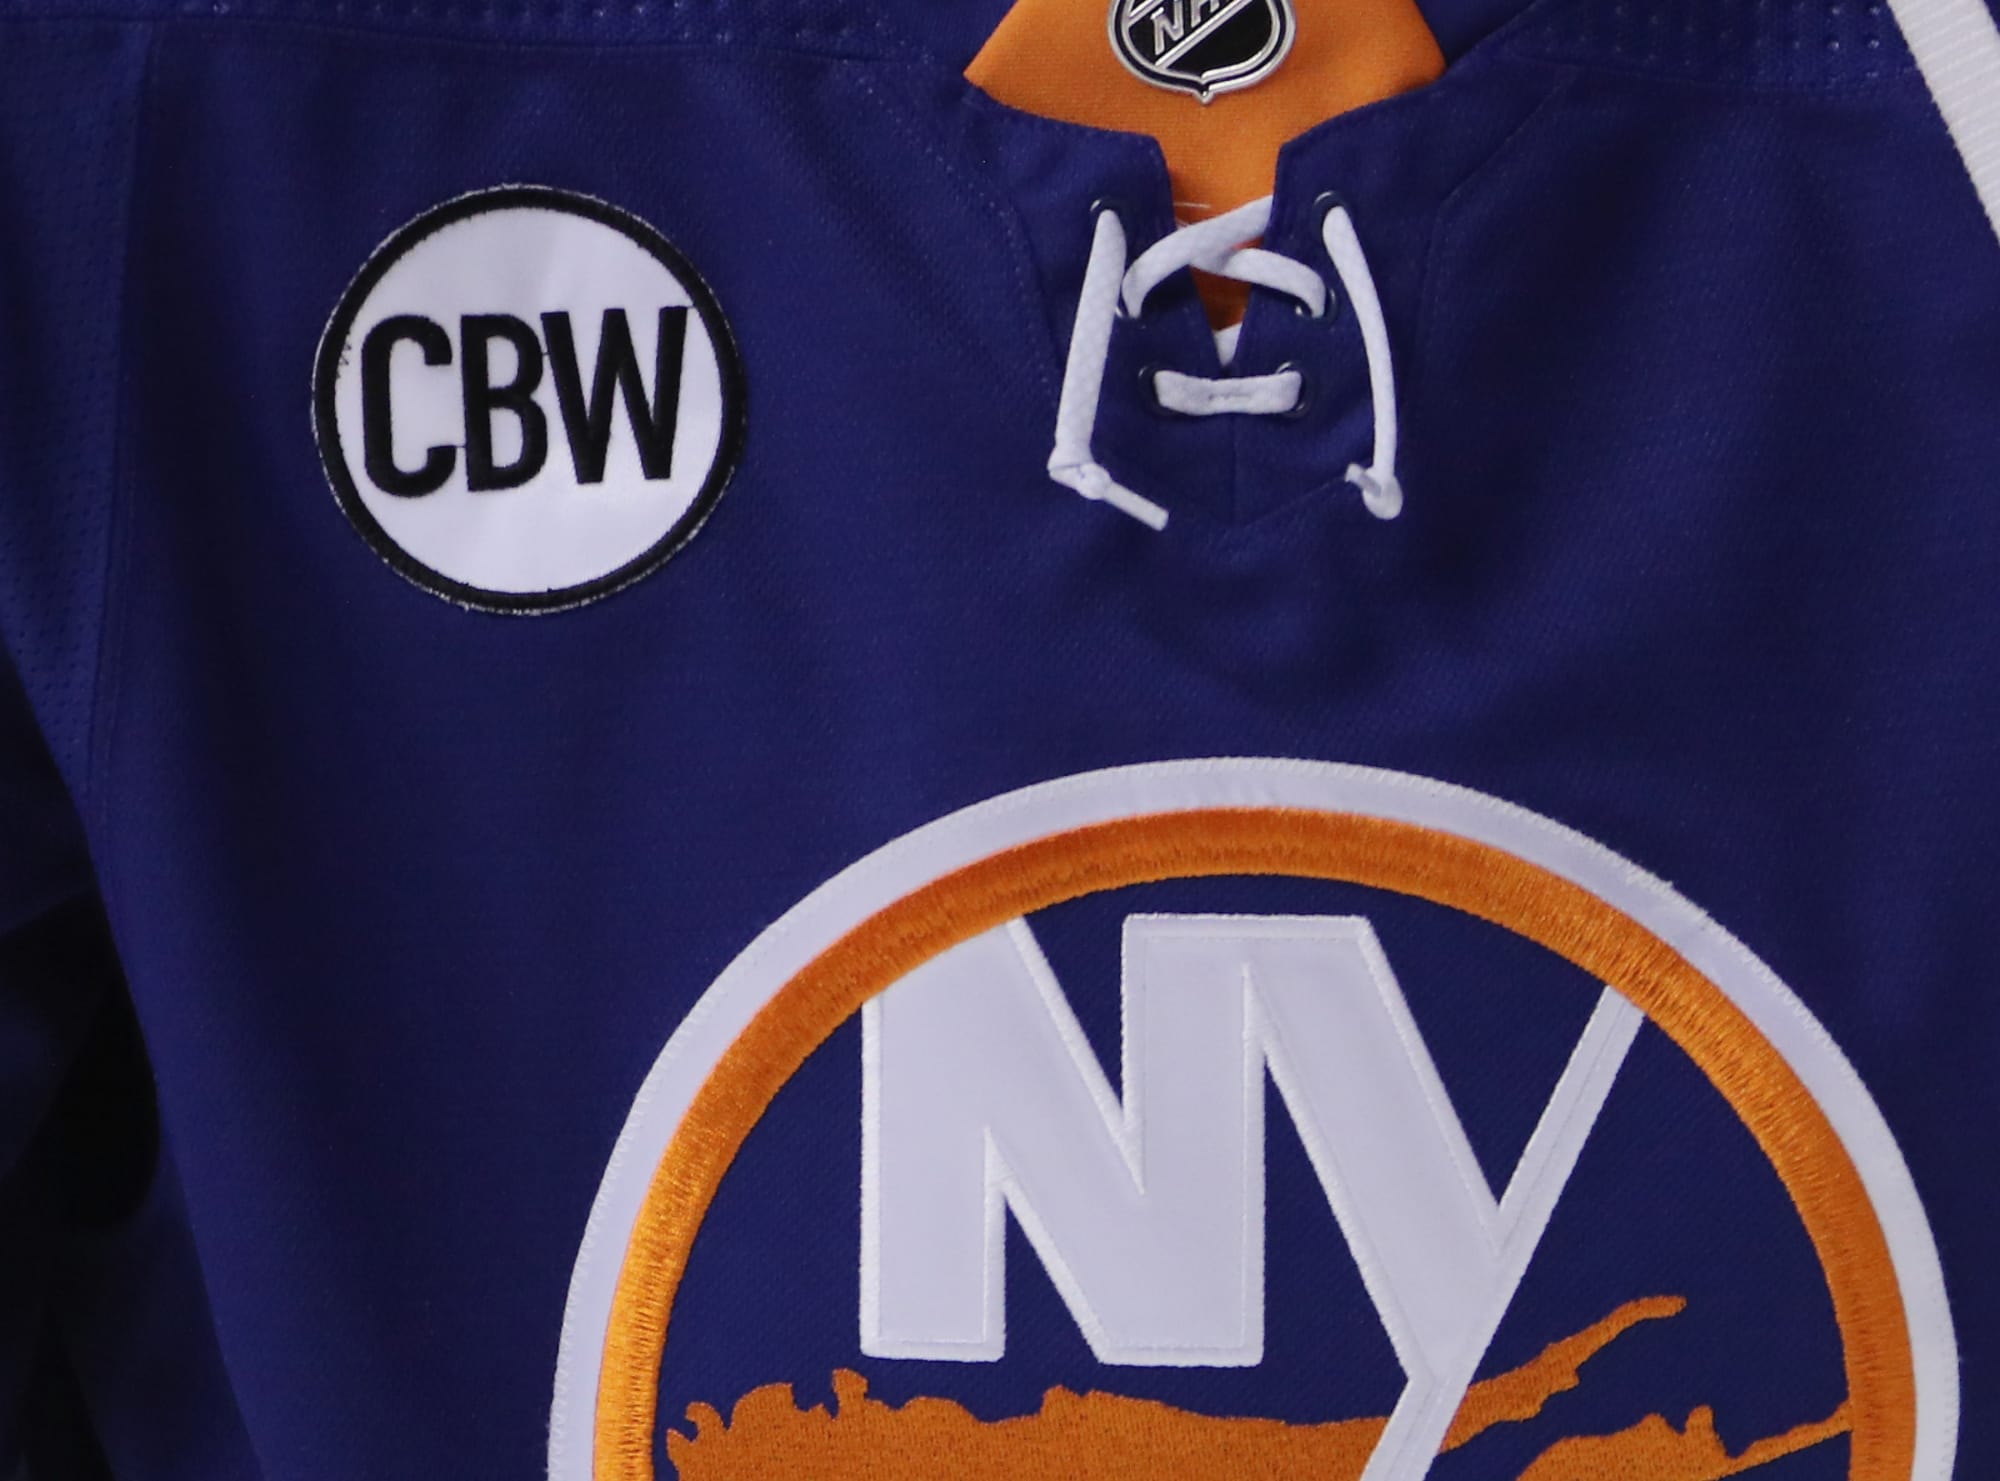 what is cbw on the islanders jersey